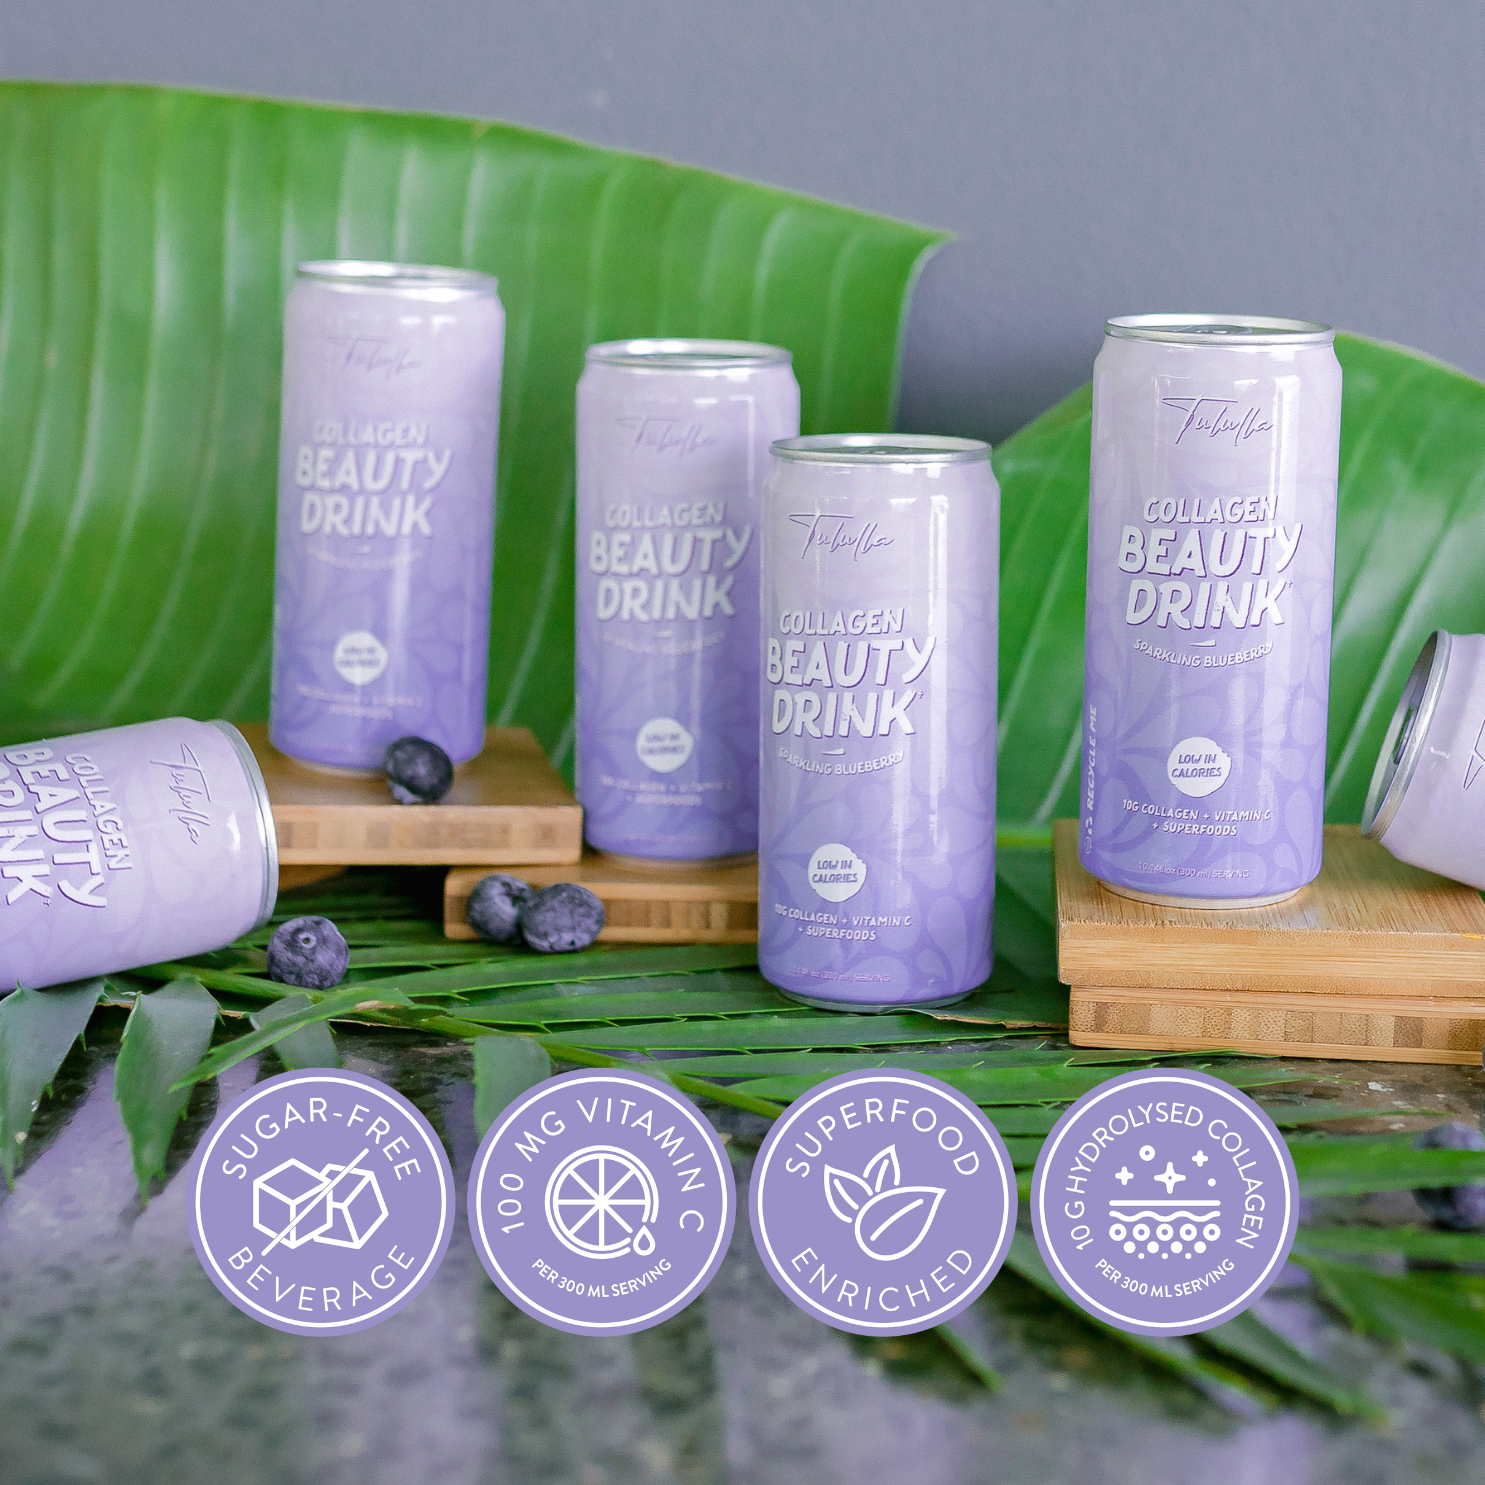 6 delicious collagen beauty drink cans with a sparkling blueberry flavour